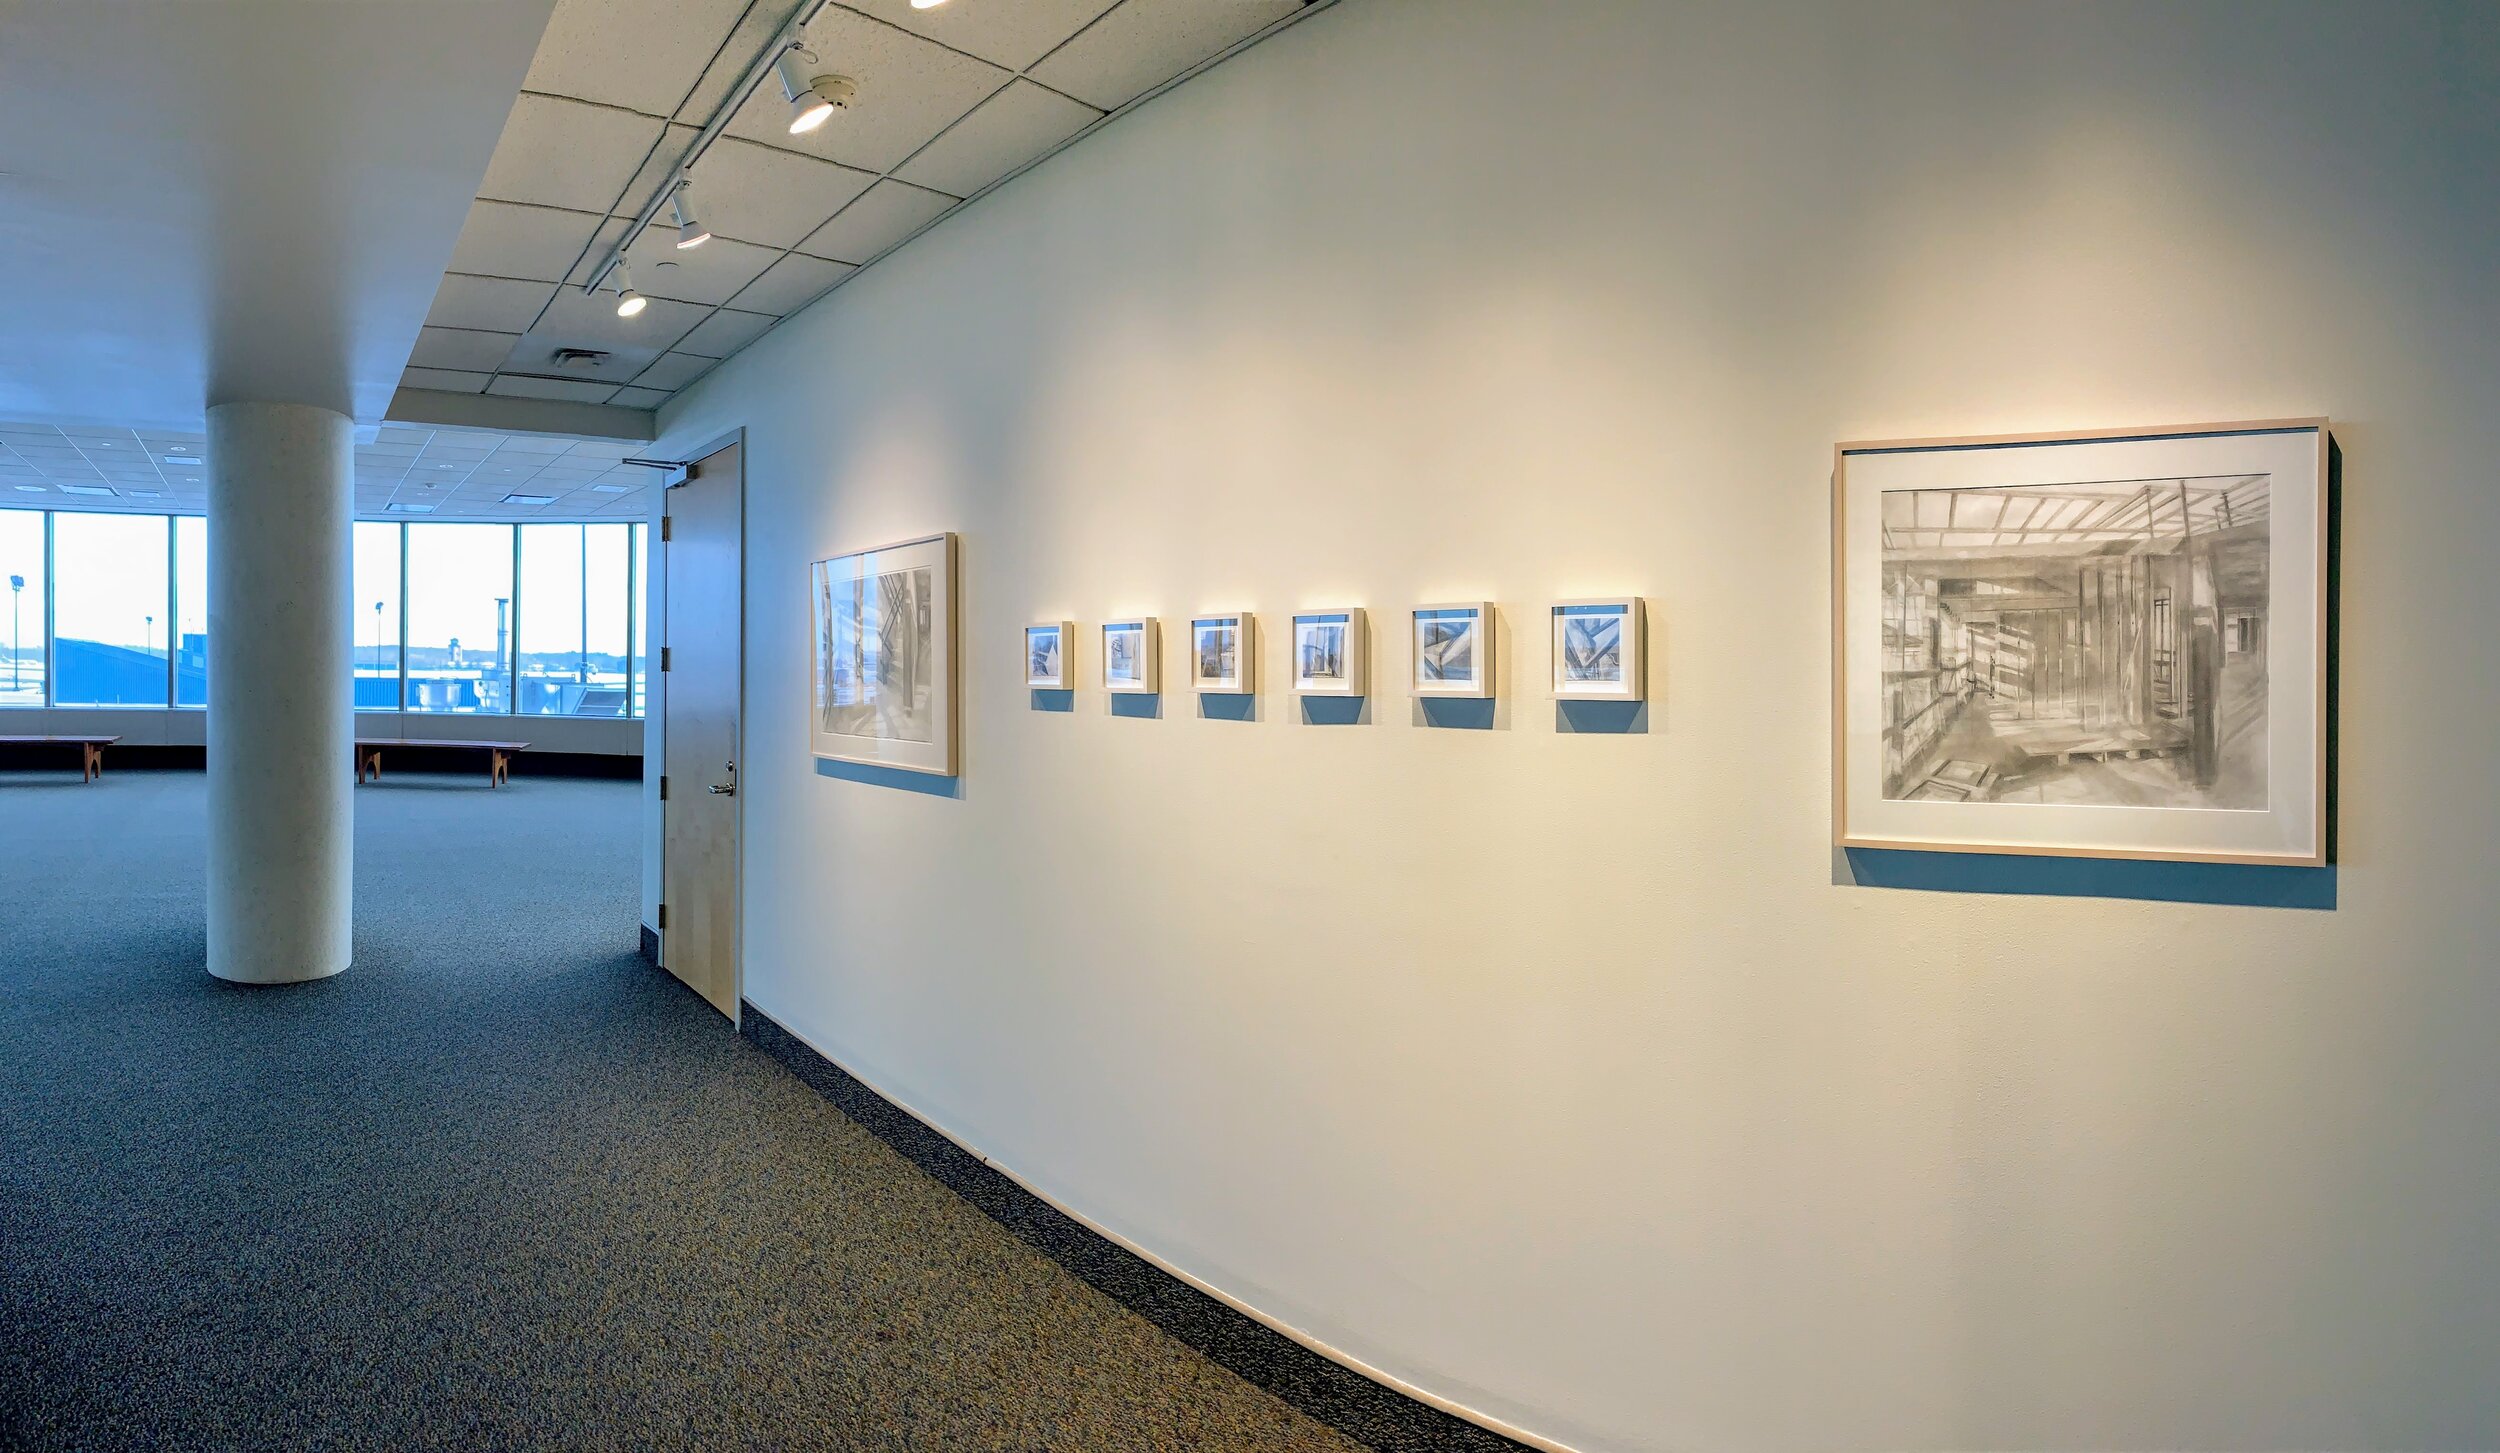   Patterns of Engagement  Albany International Airport Gallery Sept. 2019-March 2020 